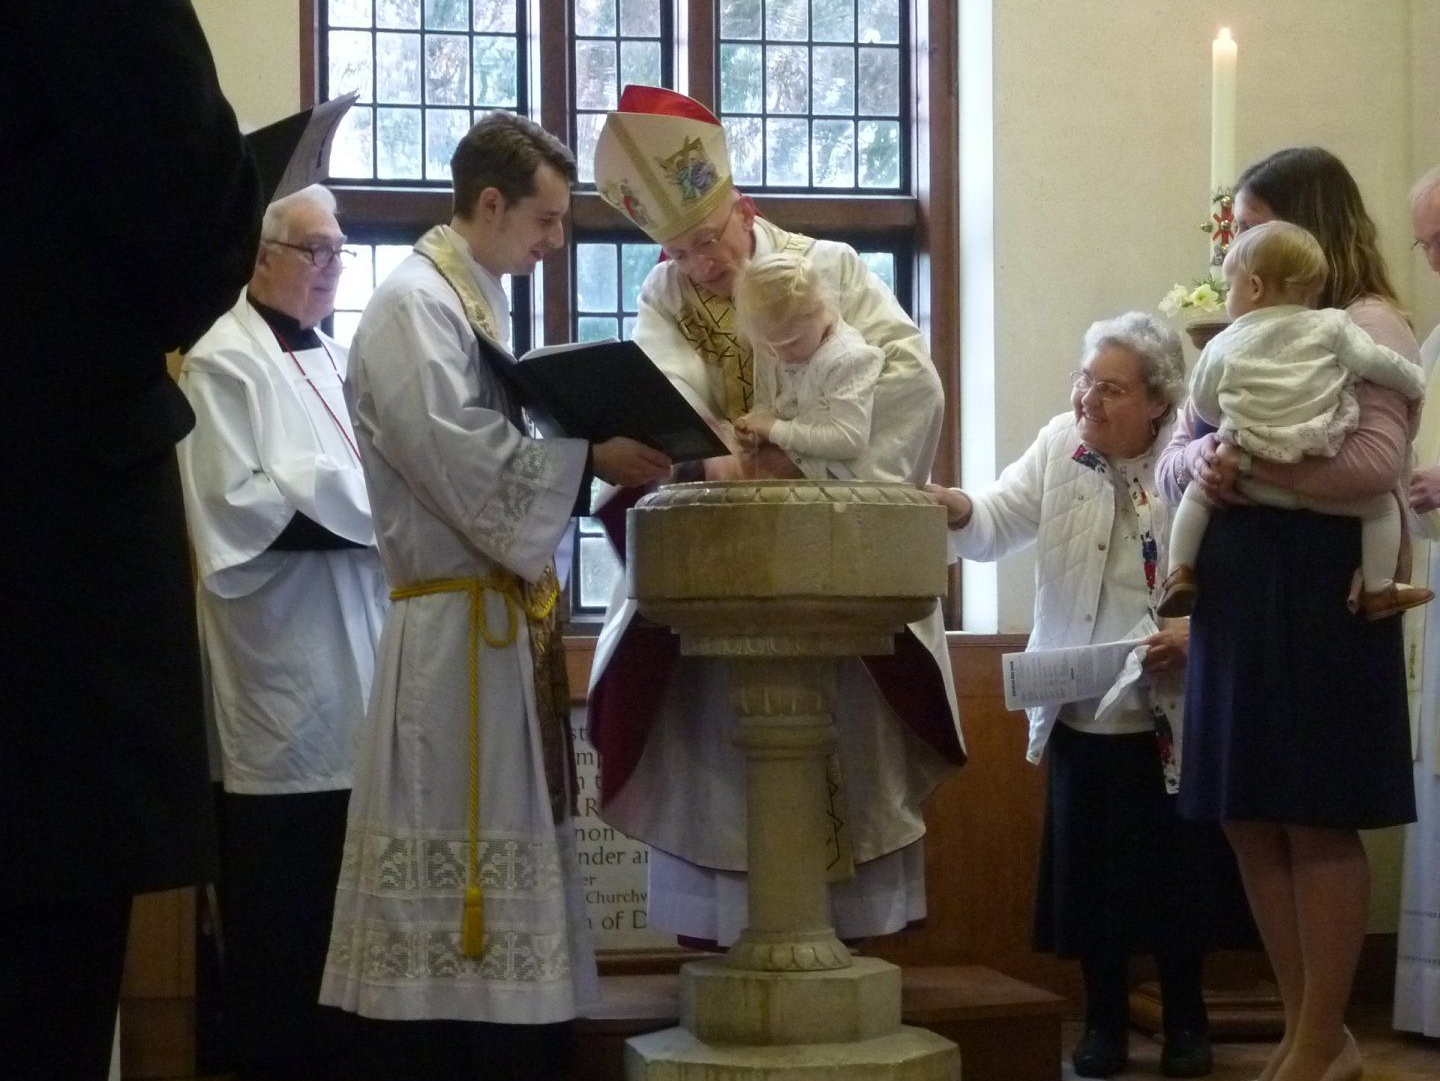 The Bishop of Chichester baptising a child